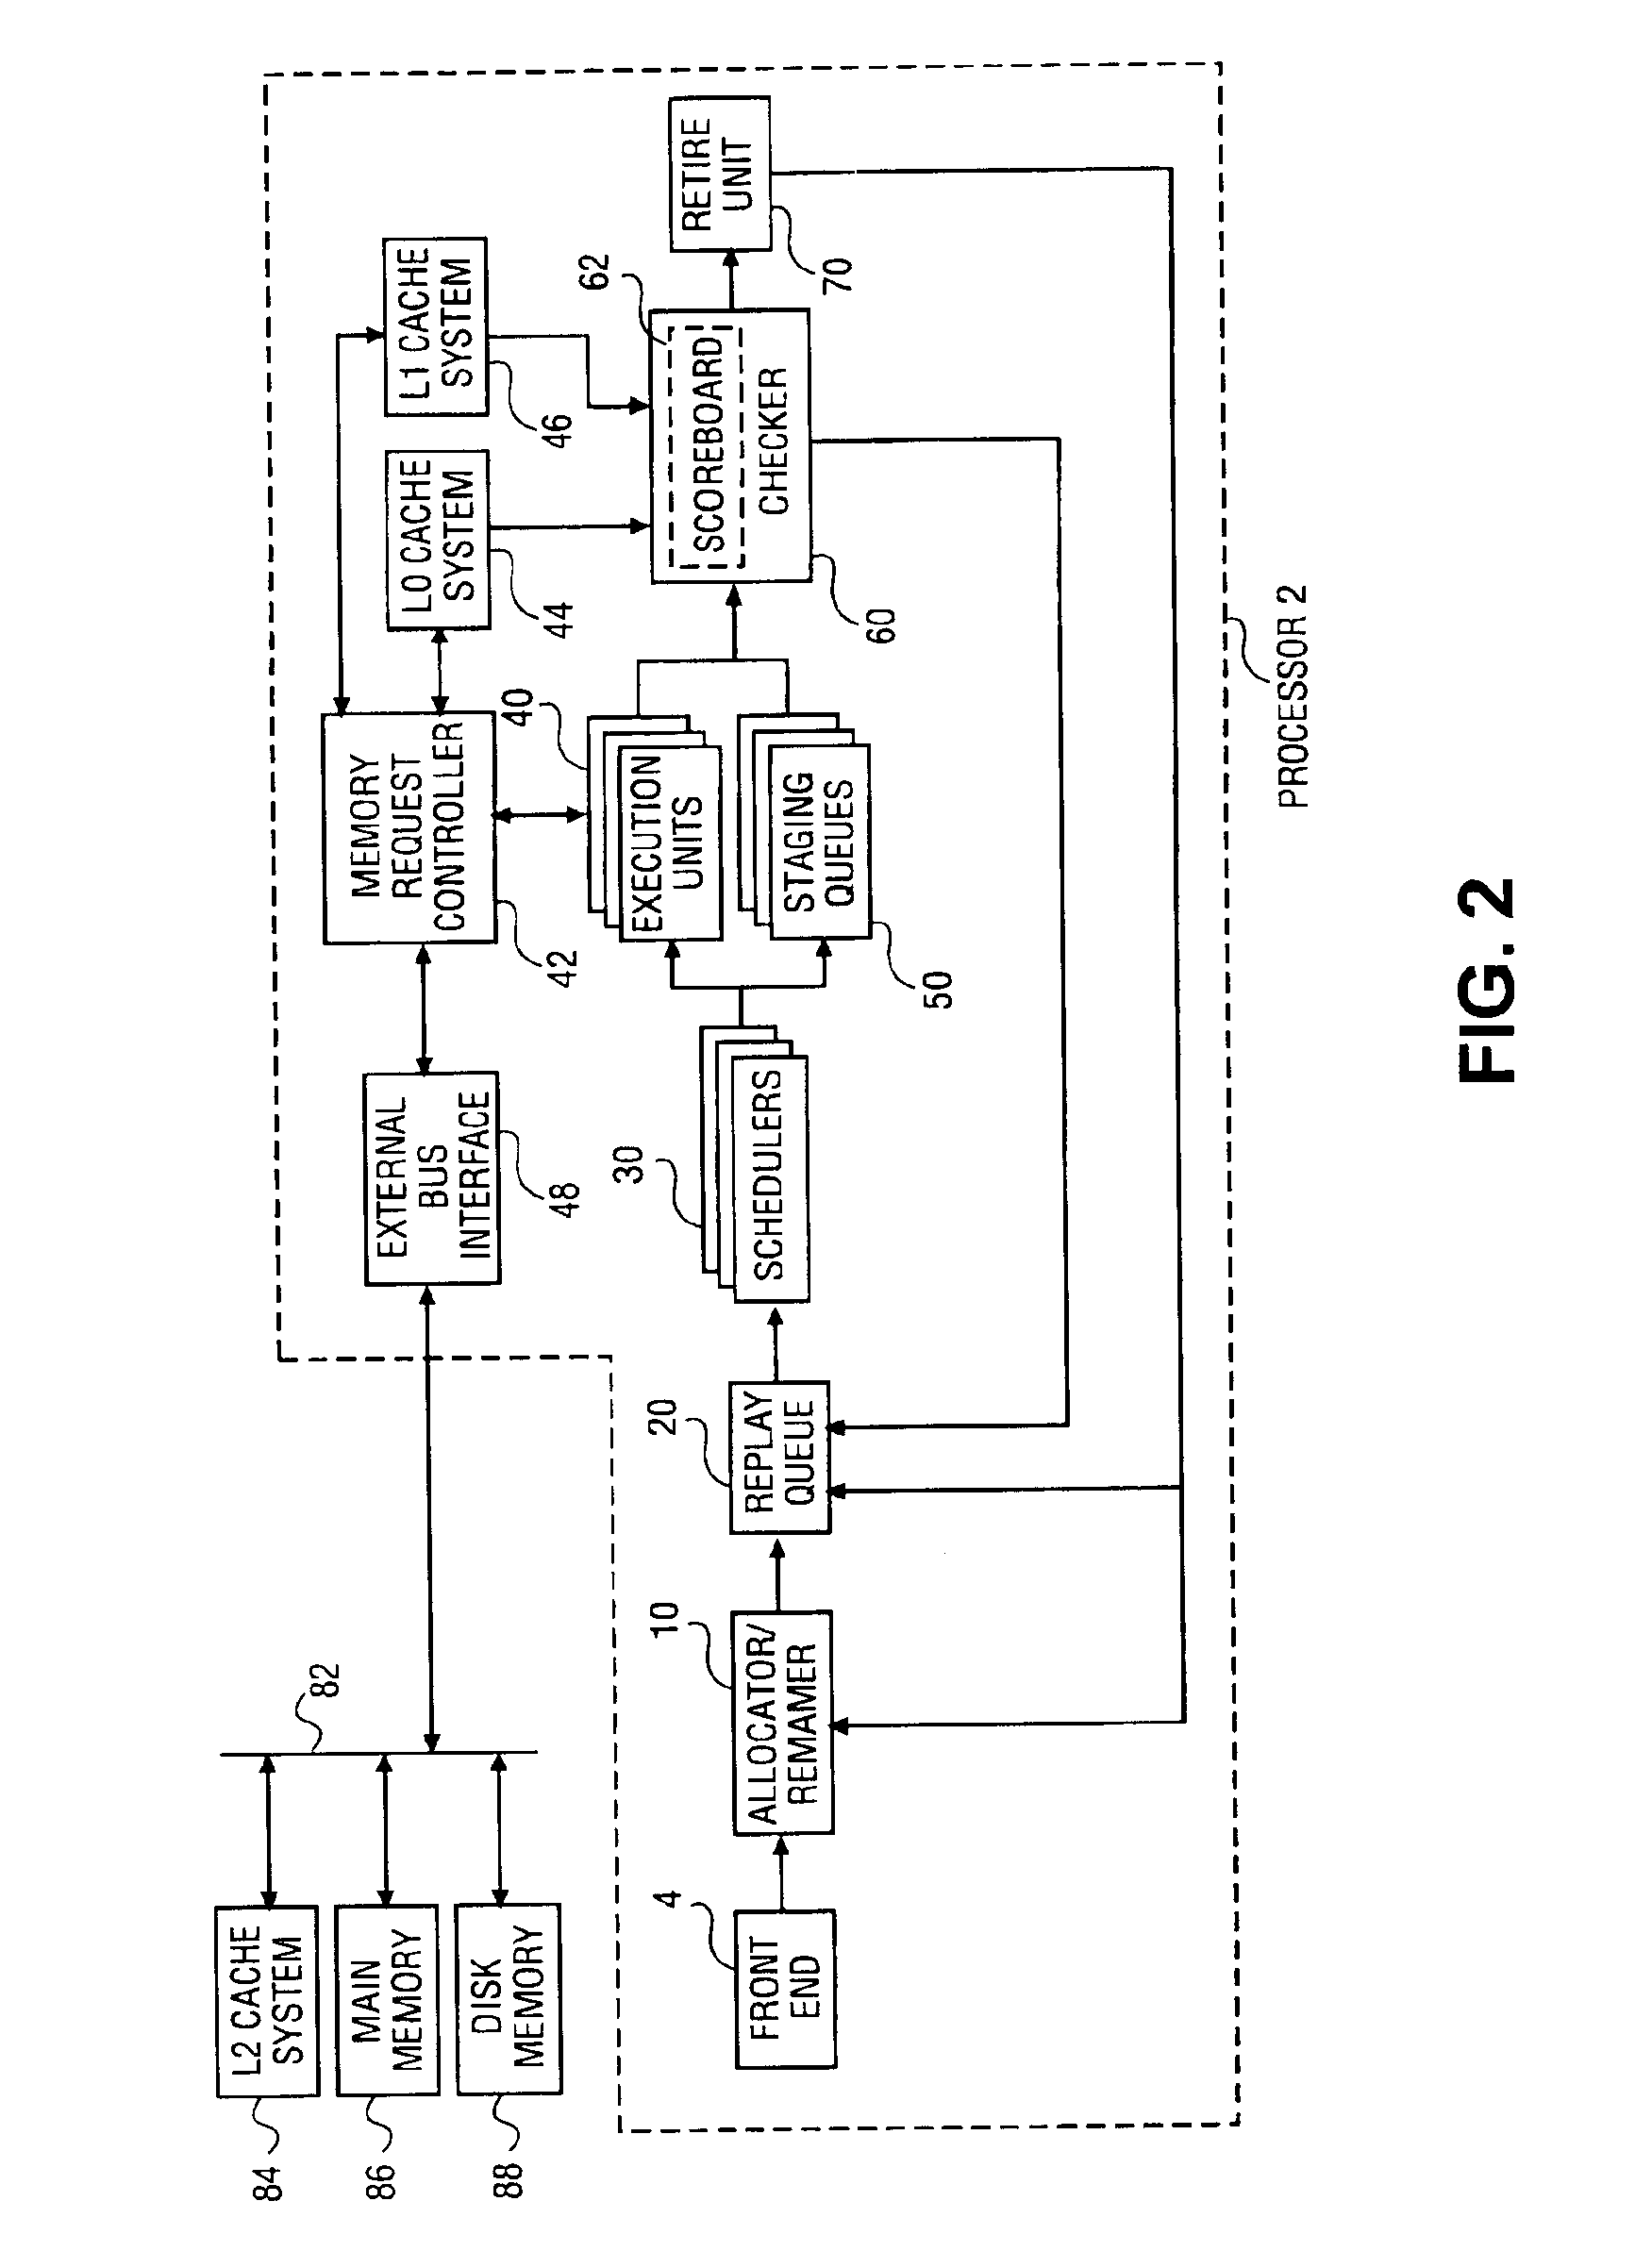 Method and apparatus for rescheduling multiple micro-operations in a processor using a replay queue and a counter